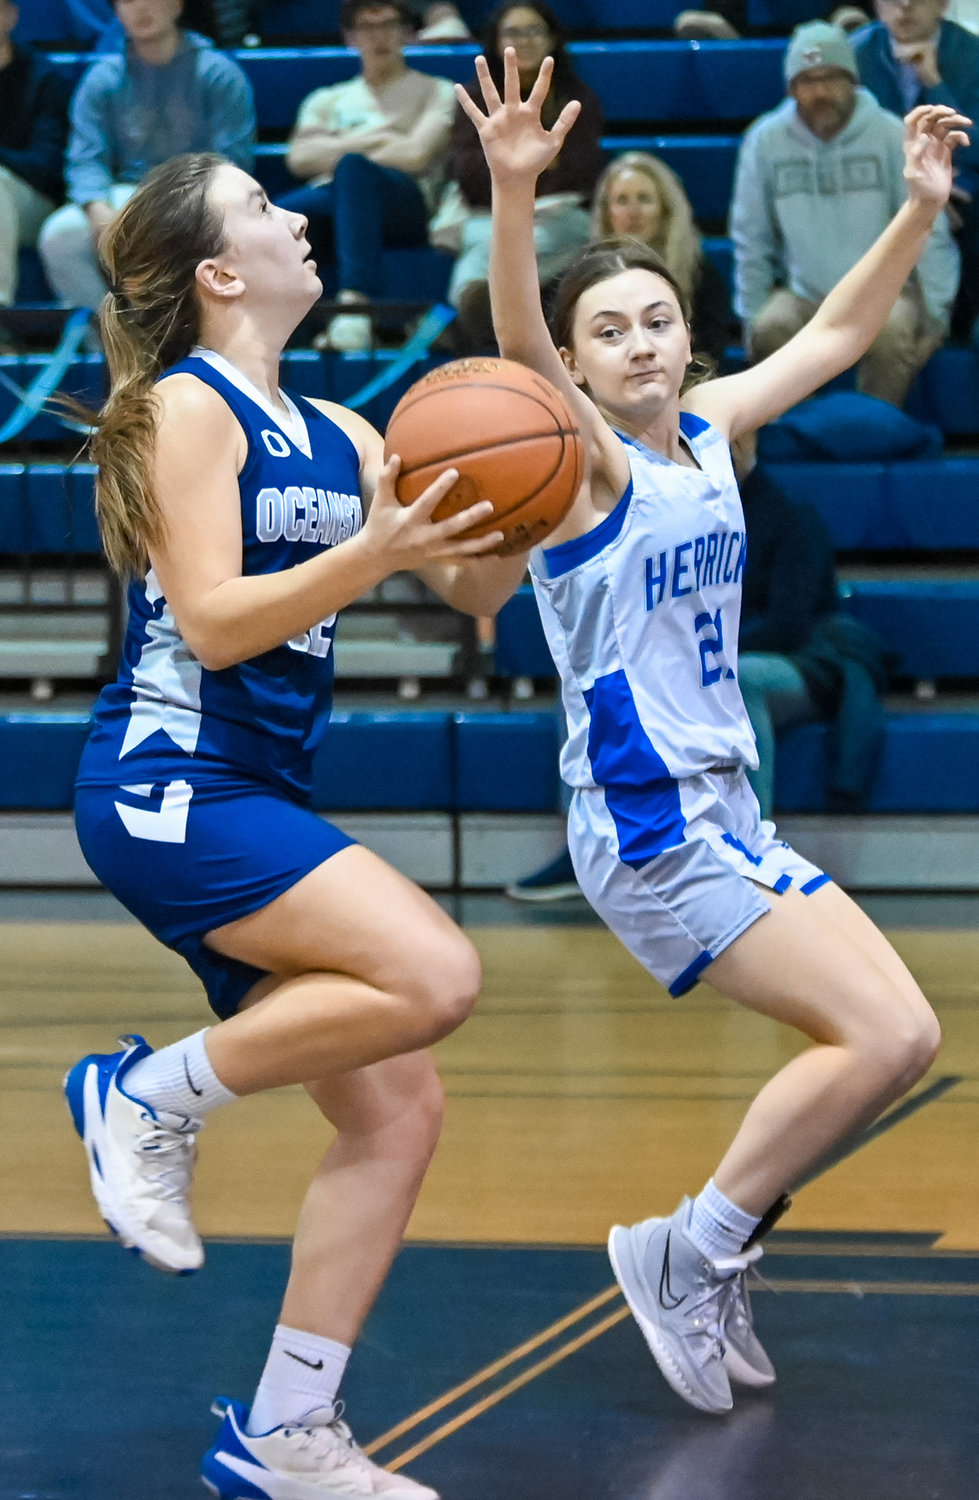 Junior Samantha Farsky, left, had 11 points in Oceanside’s playoff-clinching victory over Herricks on Feb. 9.